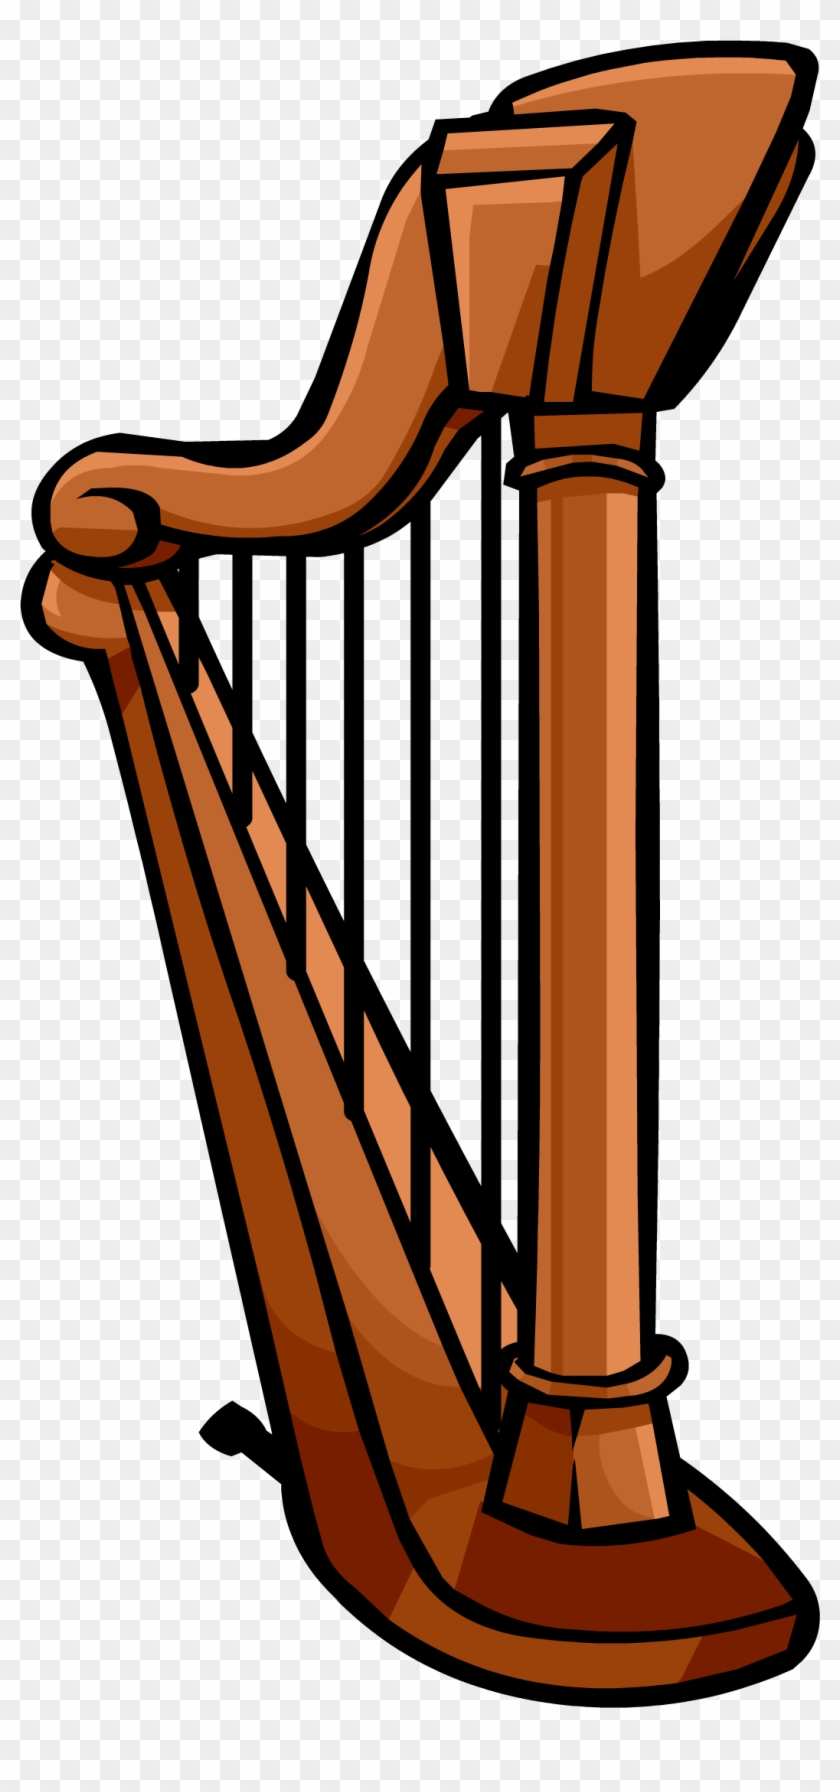 Items - Png Harp #929351